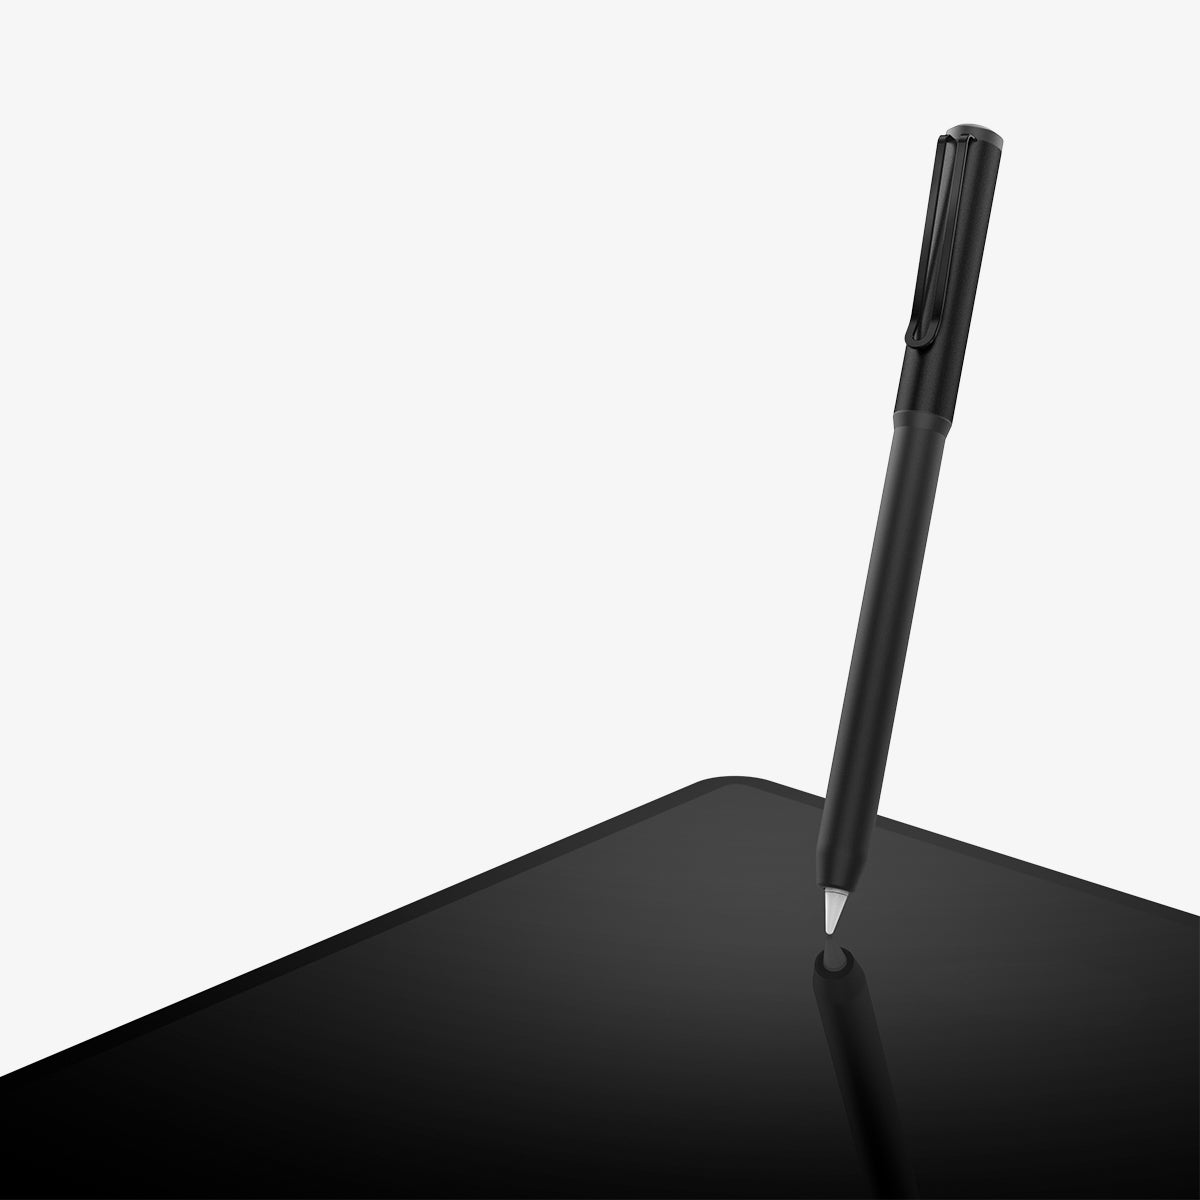 ACS05763 - Apple Pencil Holder DA201 in black showing the pencil hovering slightly above tablet